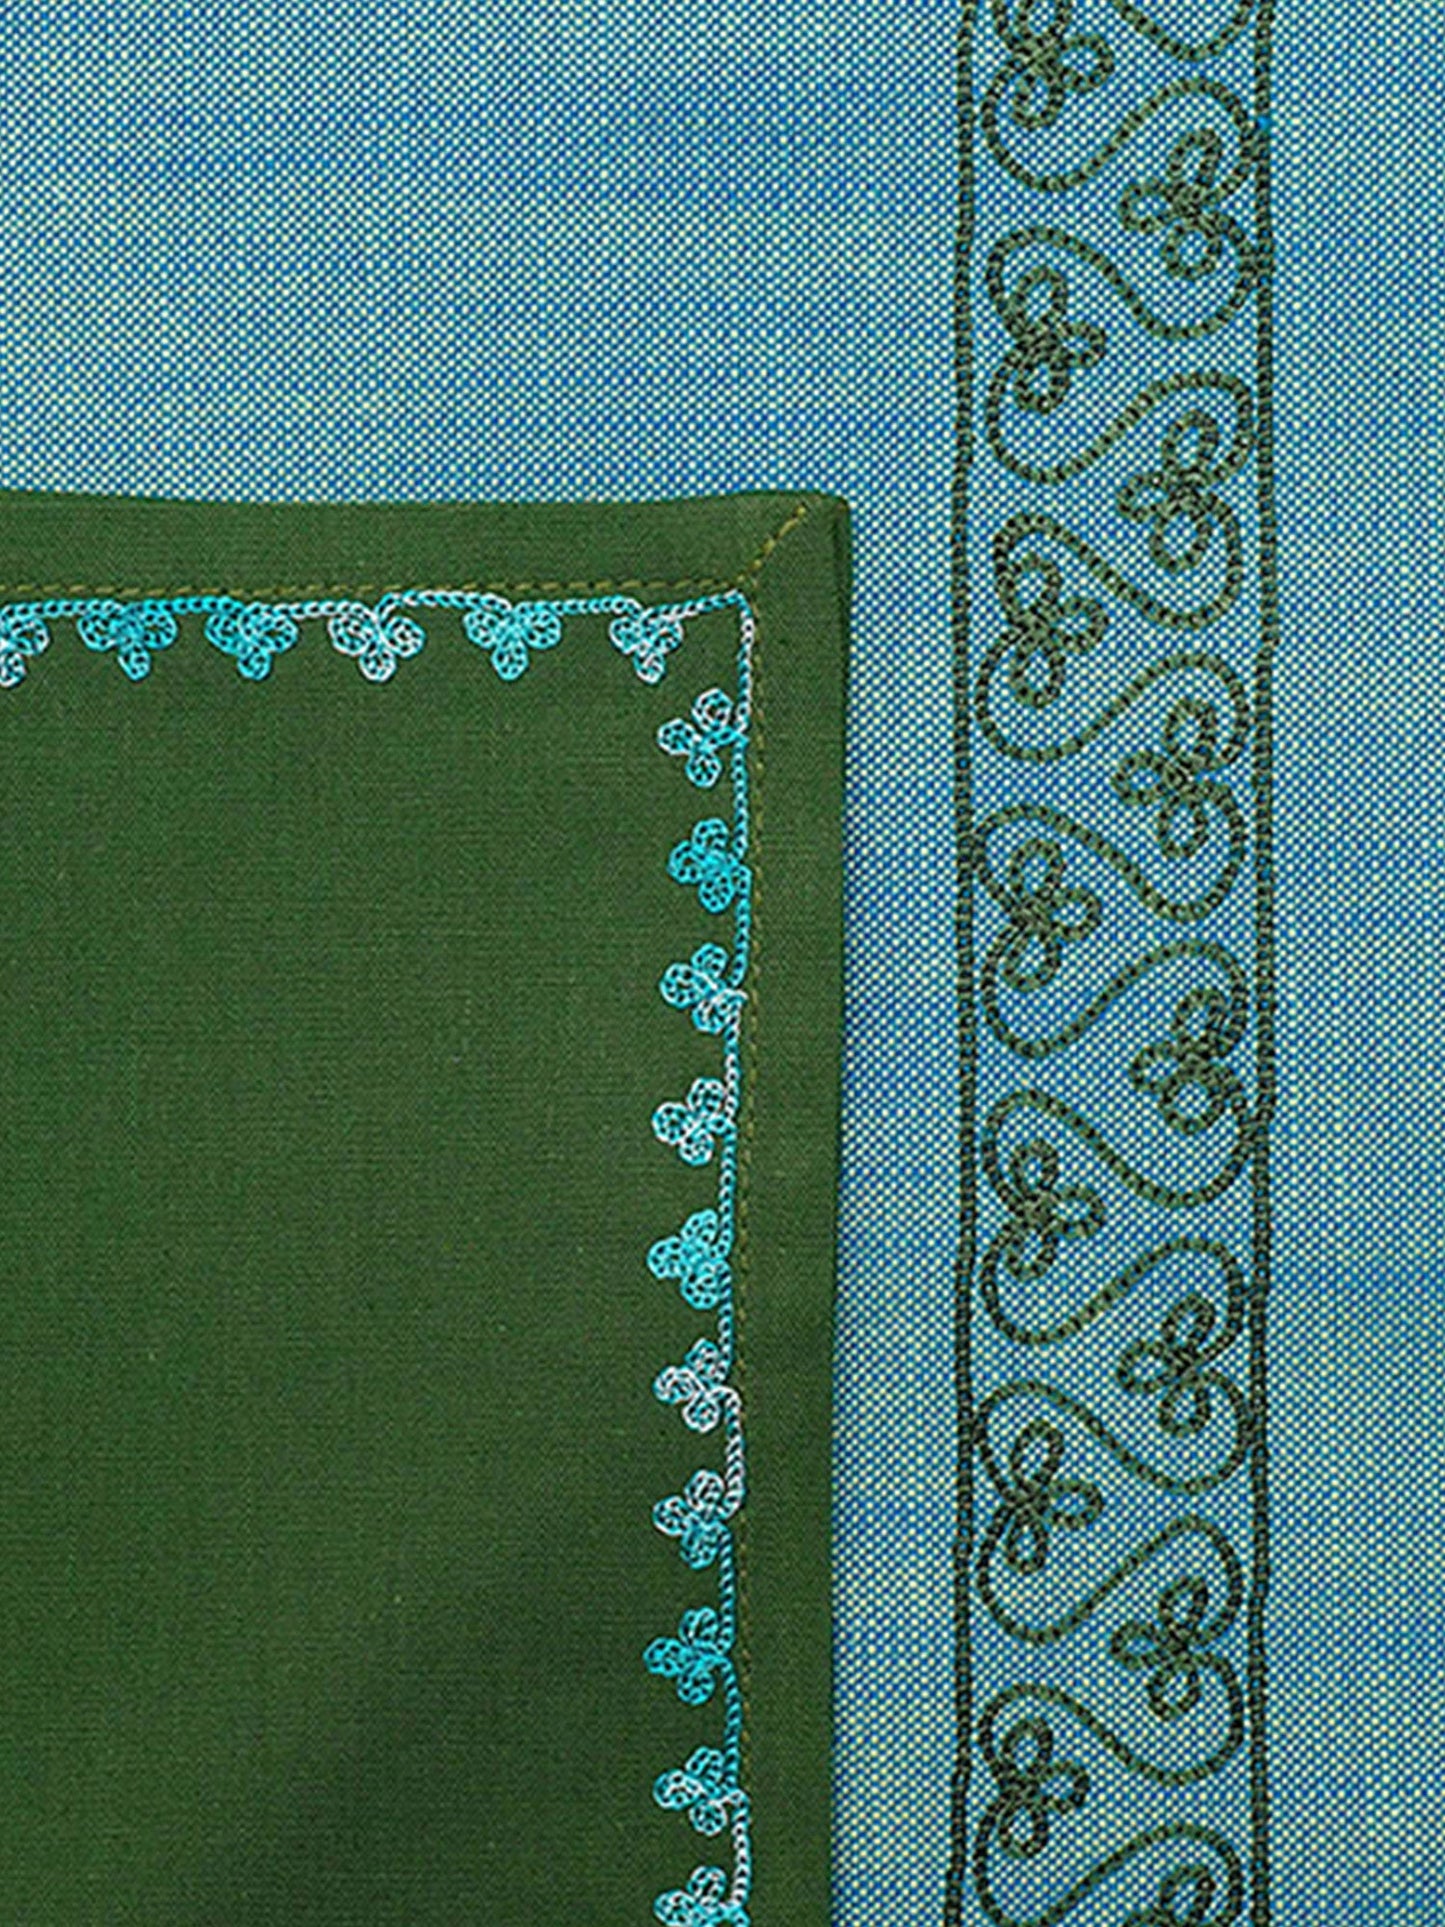 closeup of embroidered dinner table mats and napkins in contrast colors - 13x19 inch